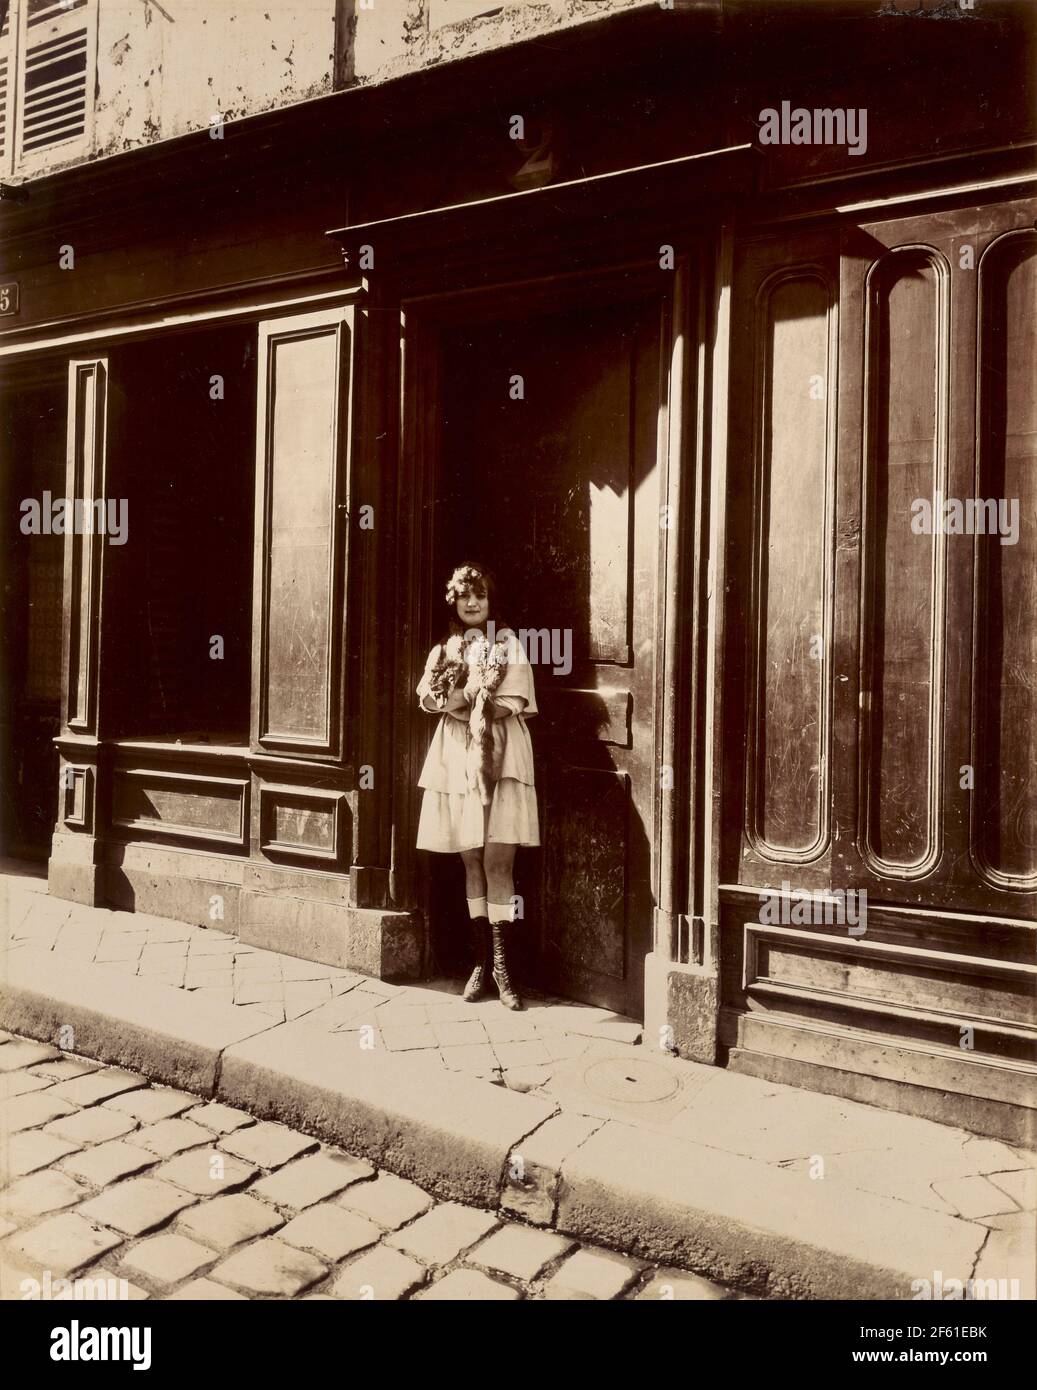 Facade of brothel, Petit Place, Versailles, France circa 1921 by Eugene Atget.  Eugène Atget, full name Jean-Eugène-Auguste Atget, 1857 - 1927.  French photographer, famed for his decades long work to document the architecture and aura of Paris before all was lost to modernisation. Stock Photo